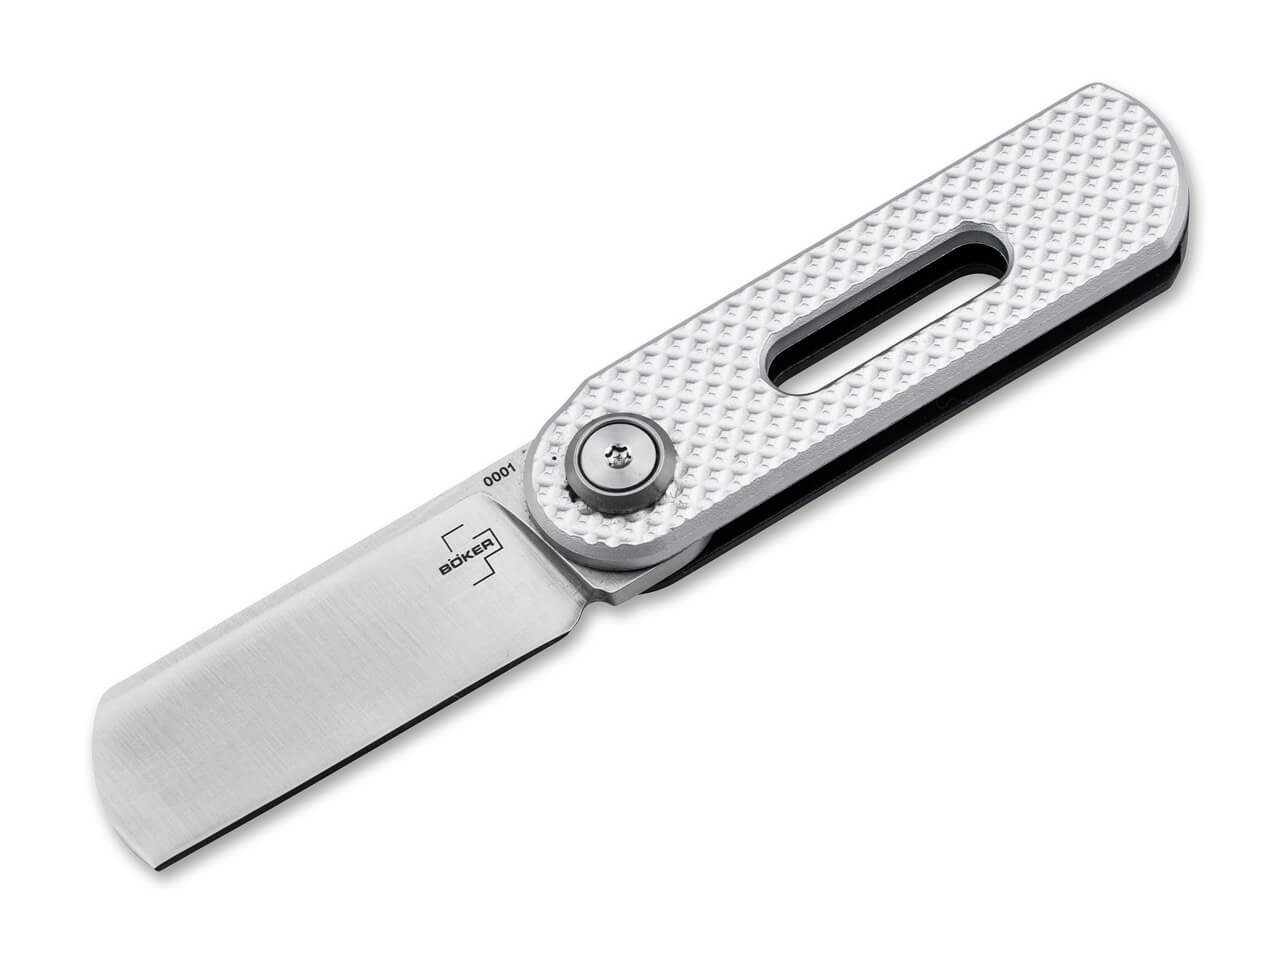 This Boker EOD Ceramic Knife is as sexy as it is sharp!